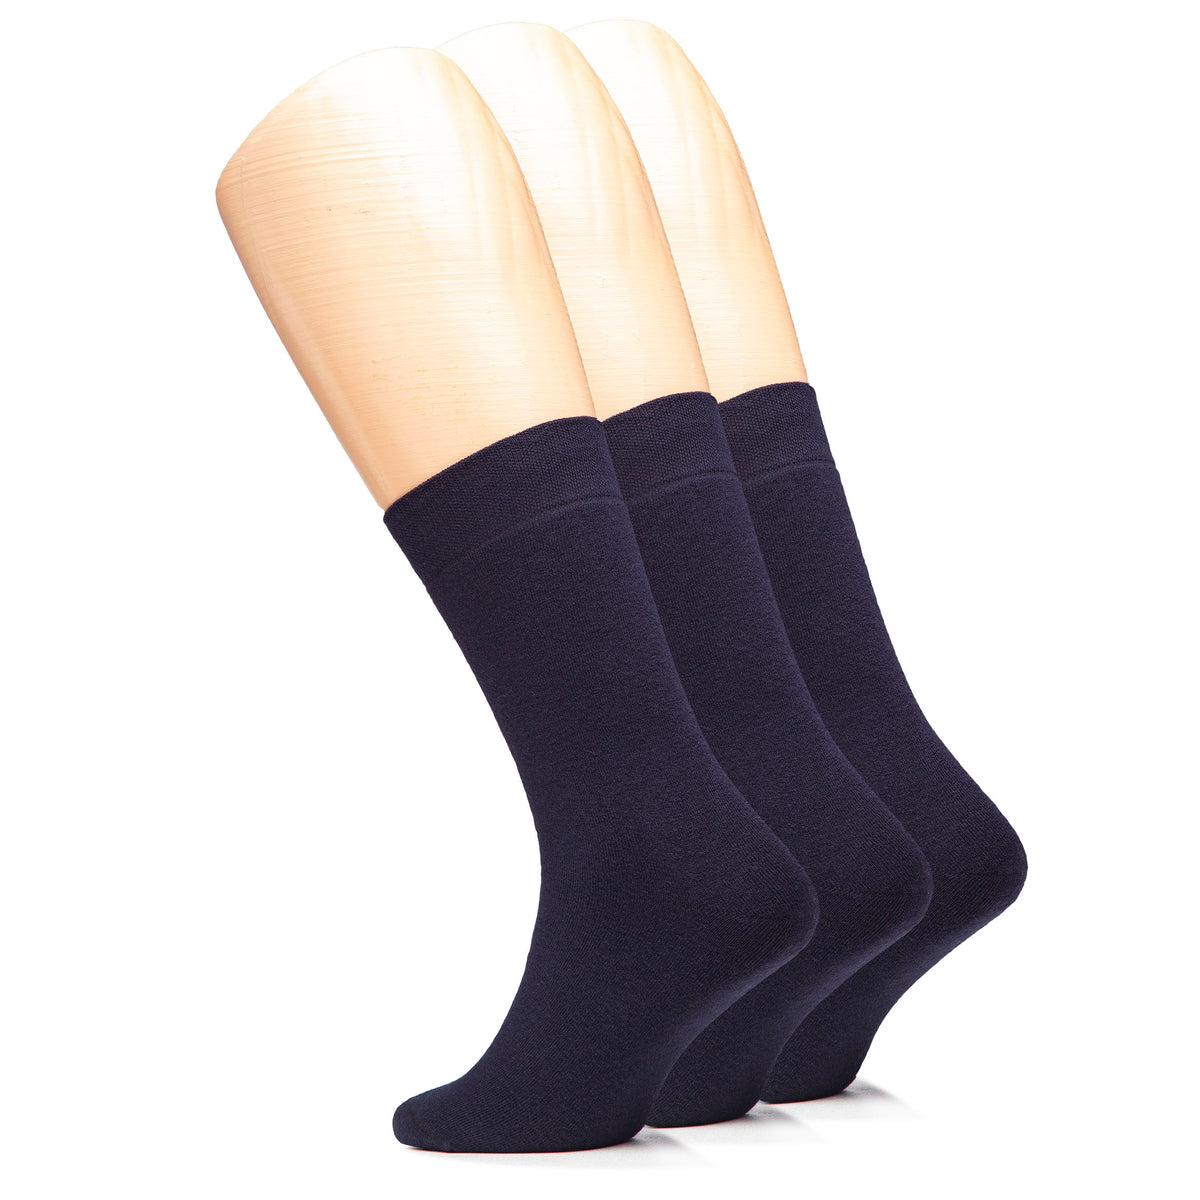 Experience the luxurious comfort of these Men's Cotton Full Cushion Ankle Socks. Ideal for all-day wear.